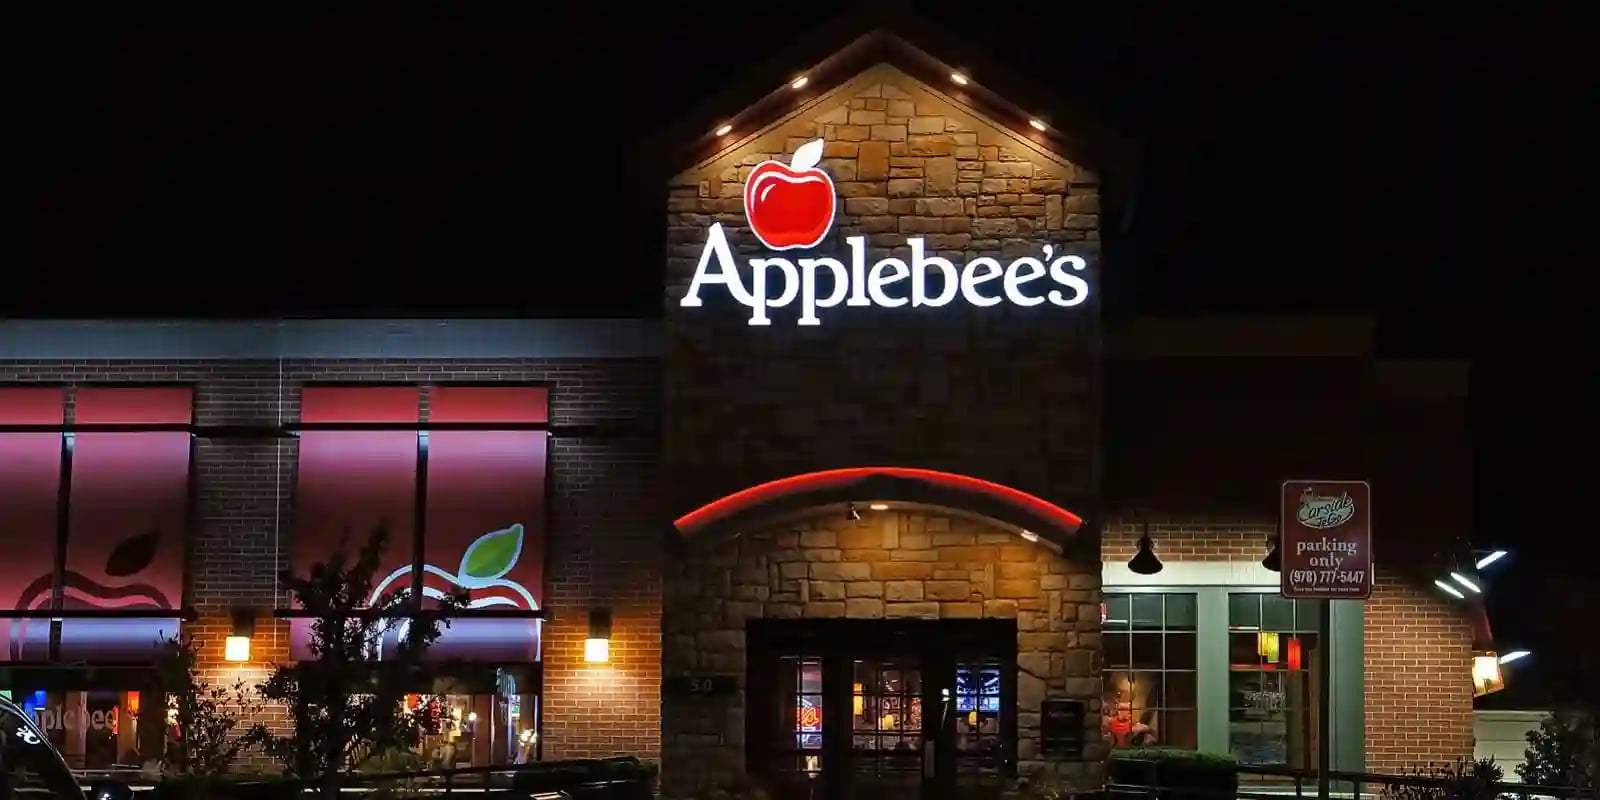 3 Great Ways to Maximize Your Applebee’s Military Discount